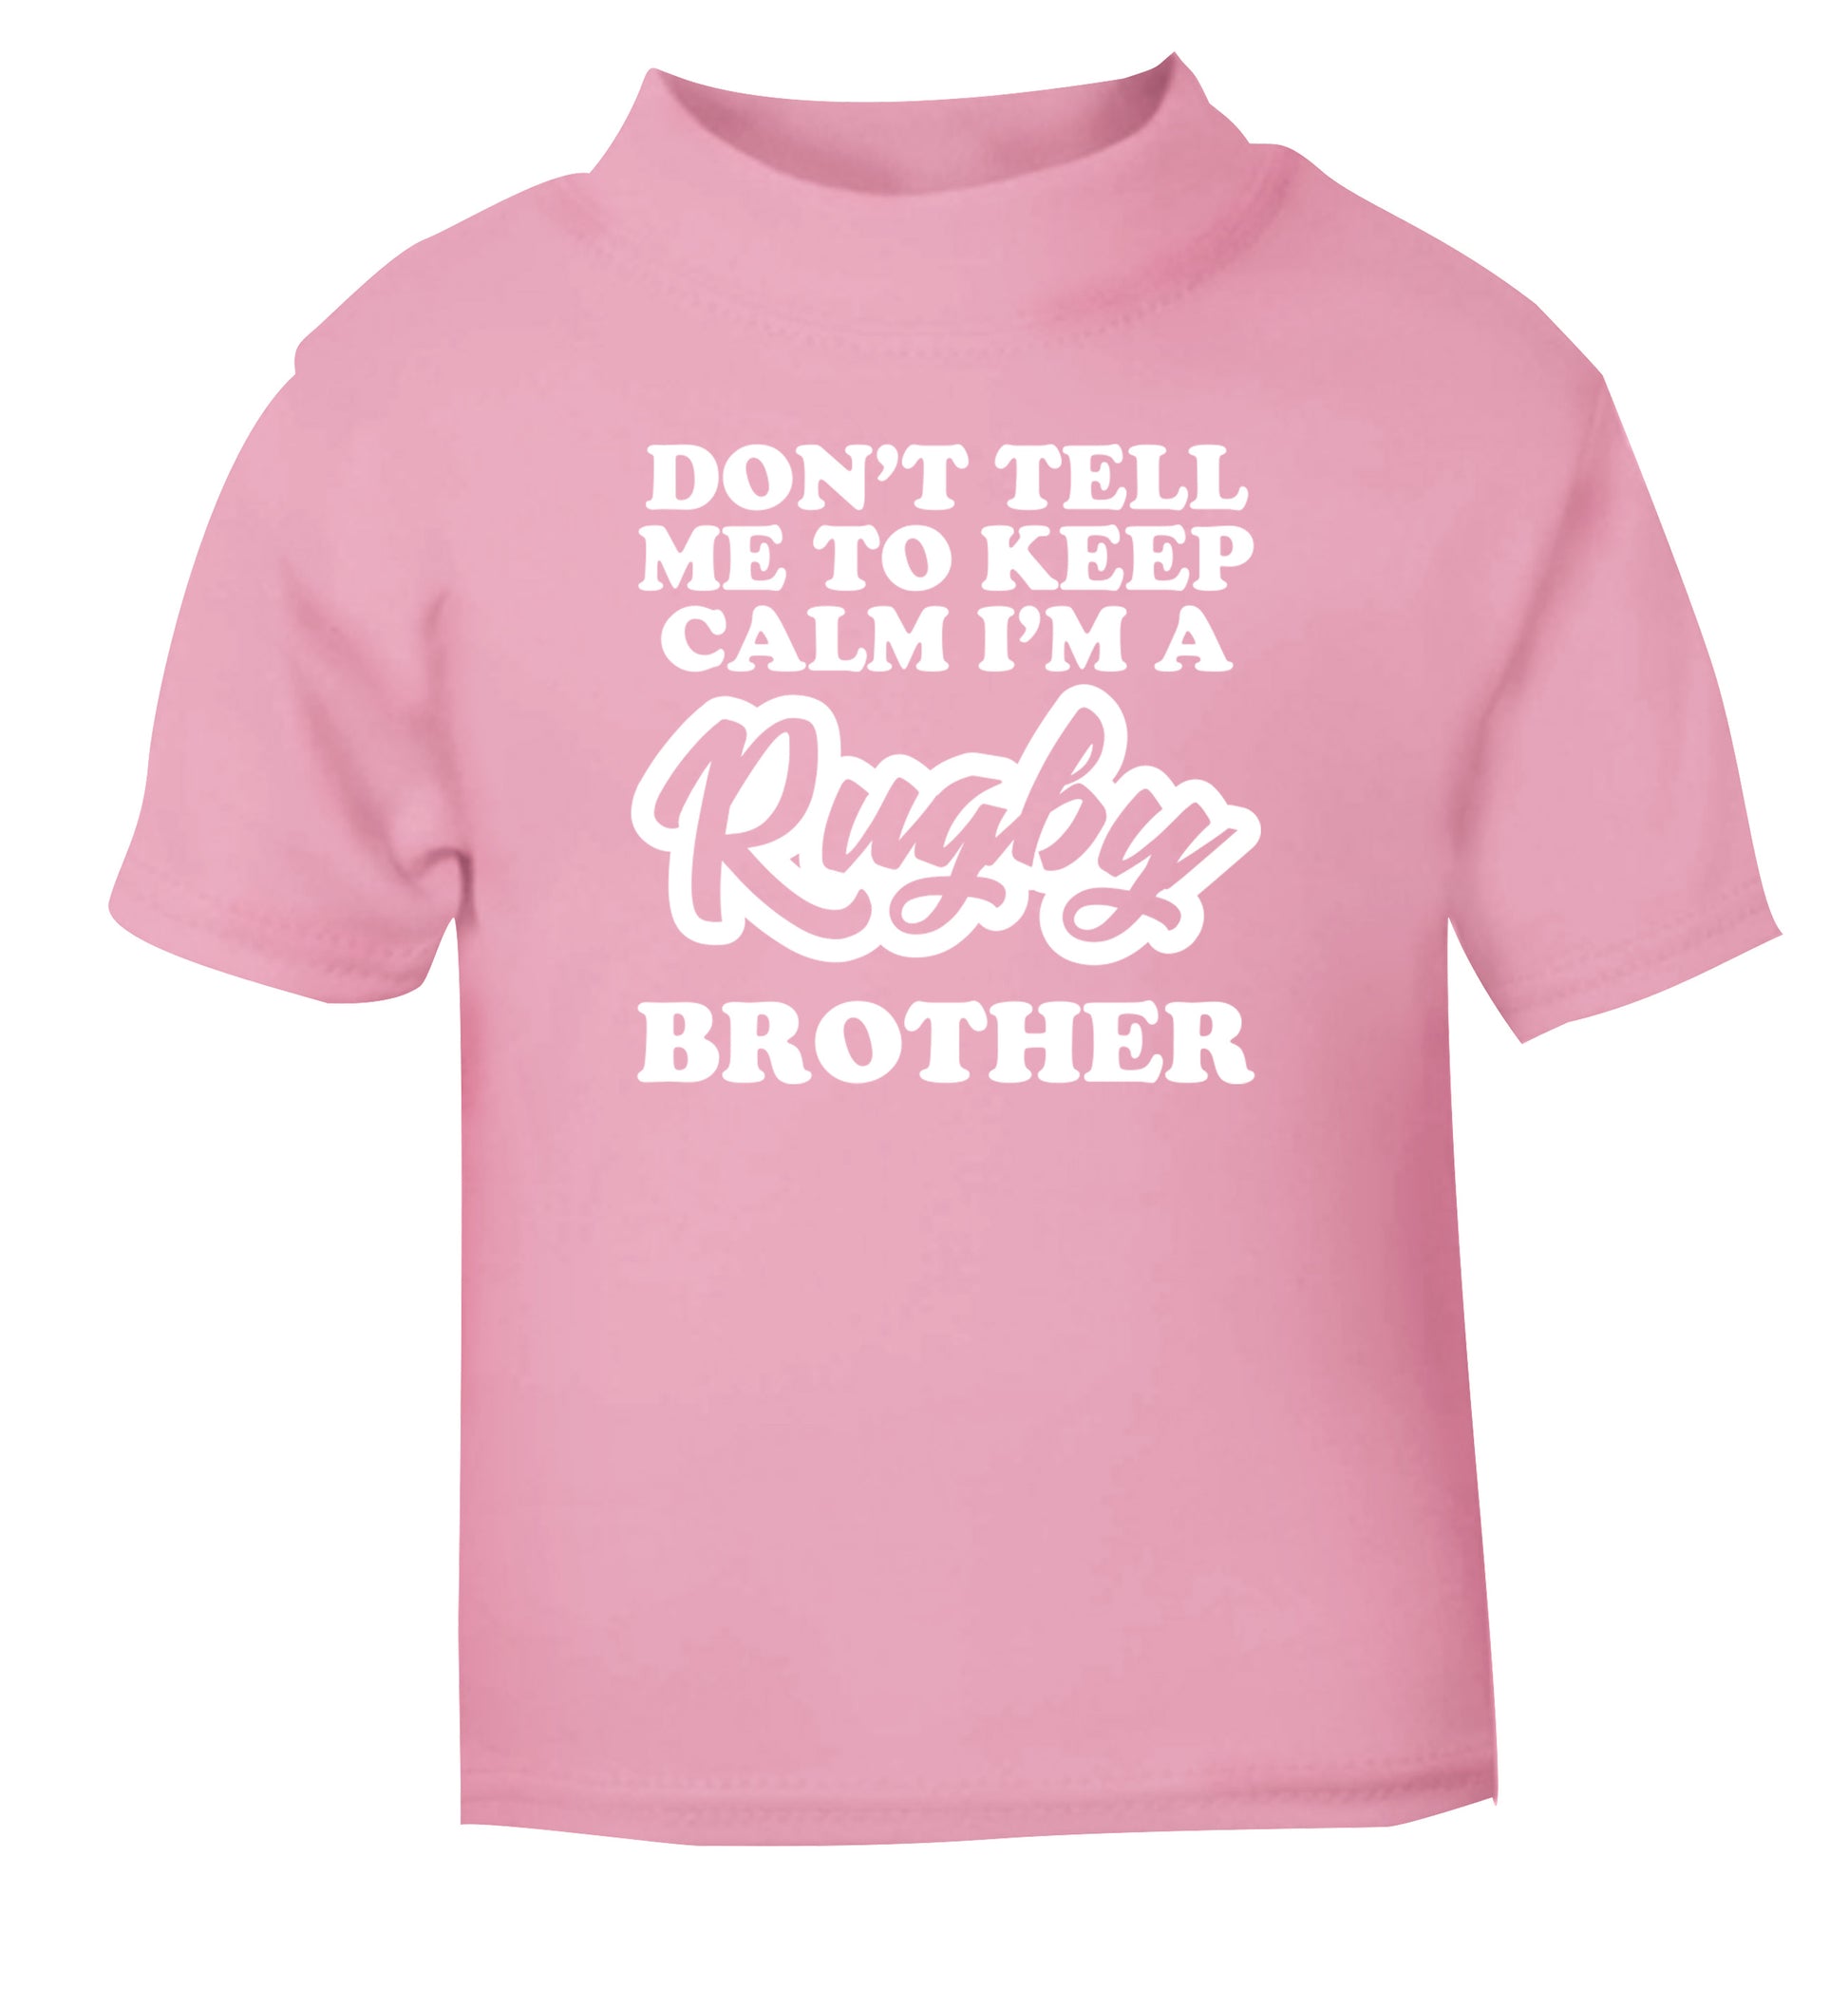 Don't tell me keep calm I'm a rugby brother light pink Baby Toddler Tshirt 2 Years